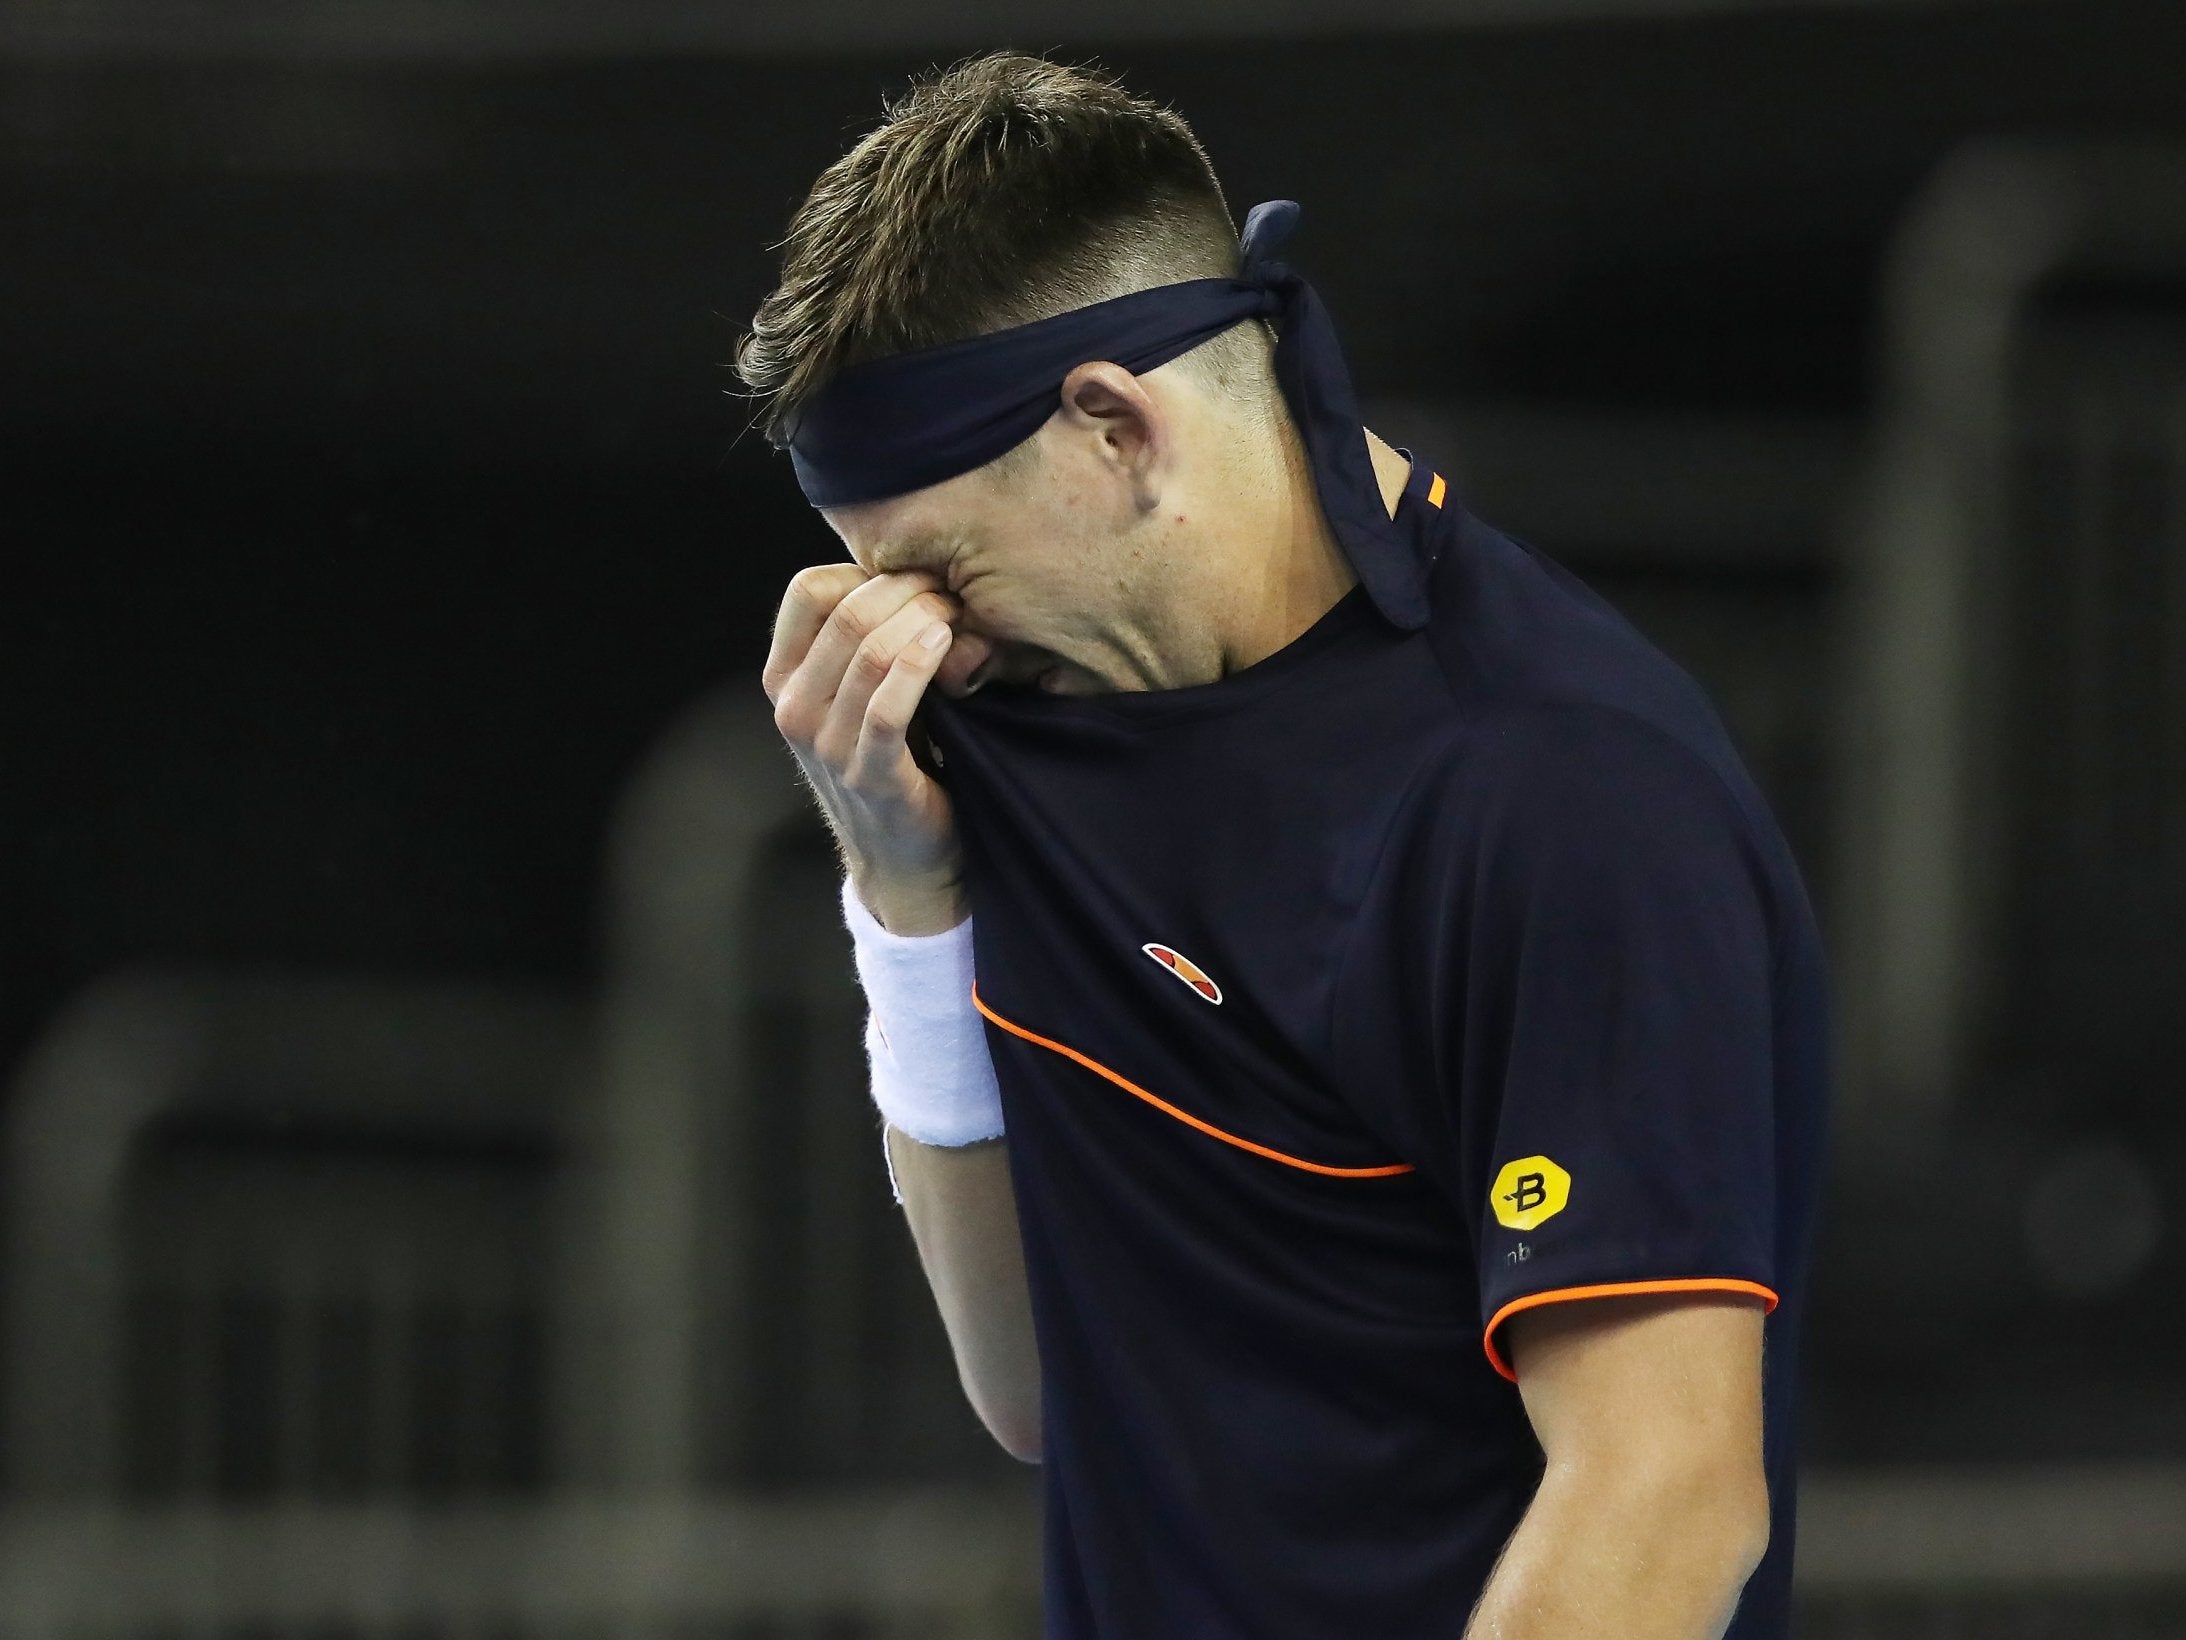 Cameron Norrie suffered a disappointing defeat against world No 434 Jurabek Karimov